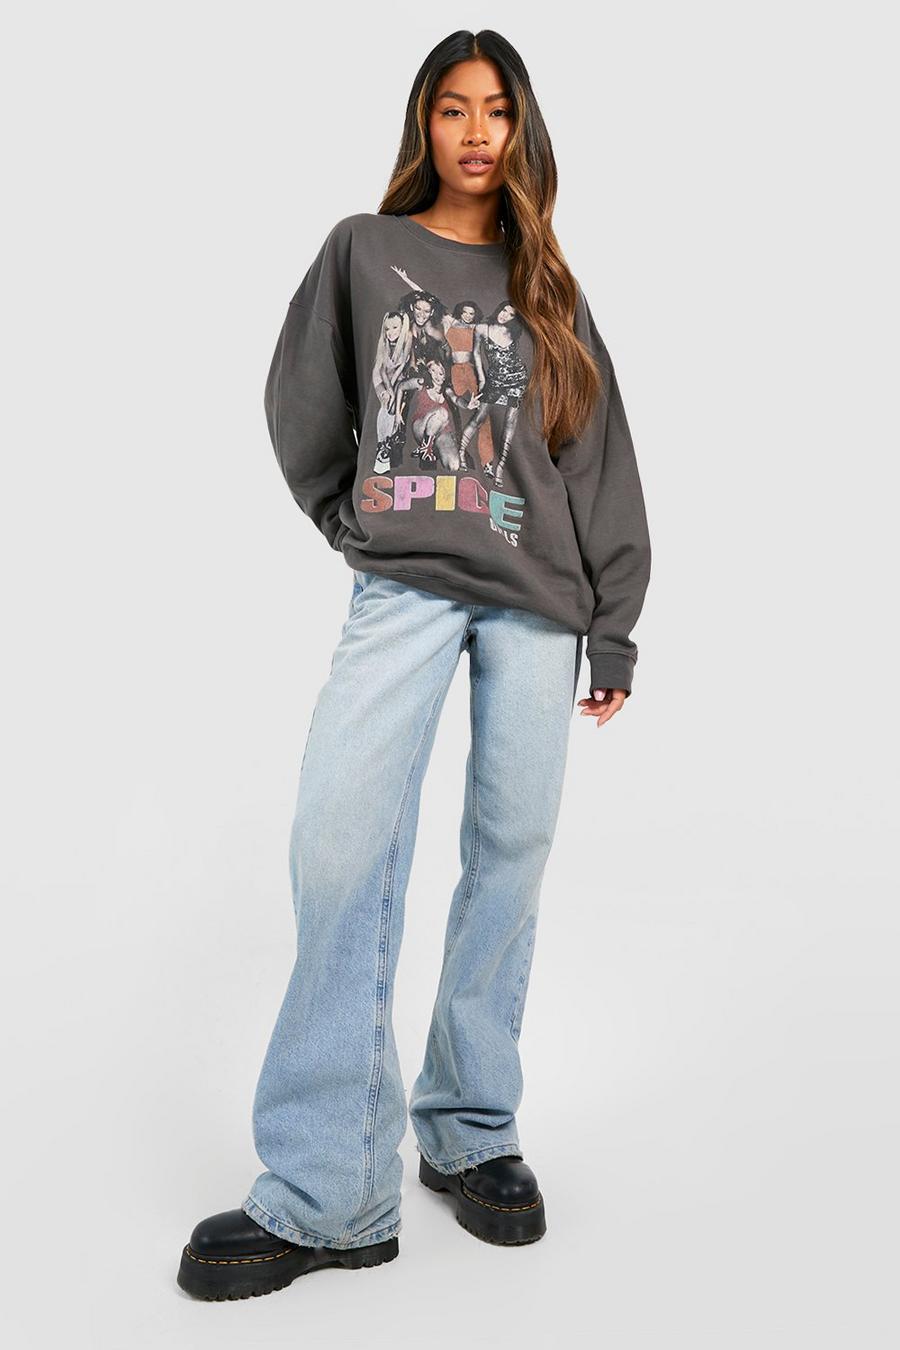 Charcoal Spice Girls License Overdyed Oversized Sweater image number 1